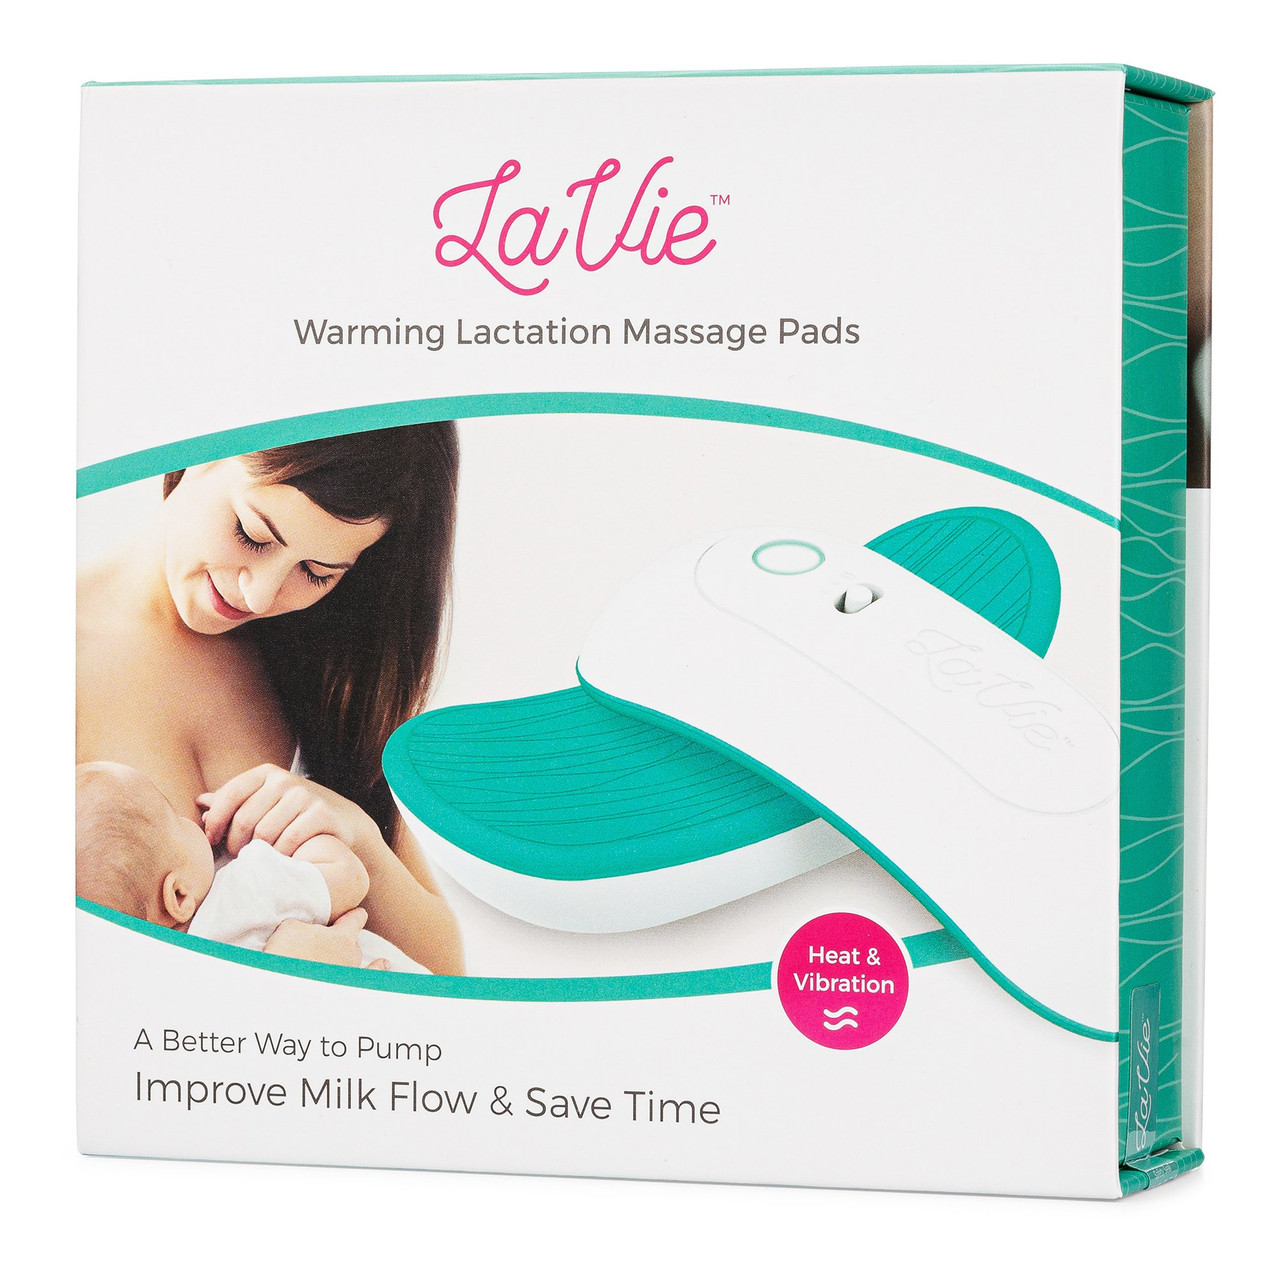  LaVie 3-in-1 Warming Lactation Massager, 2 Pack, Heat and  Vibration, Pumping and Breastfeeding Essential, for Improved Milk Flow,  Comforting Relief : Baby